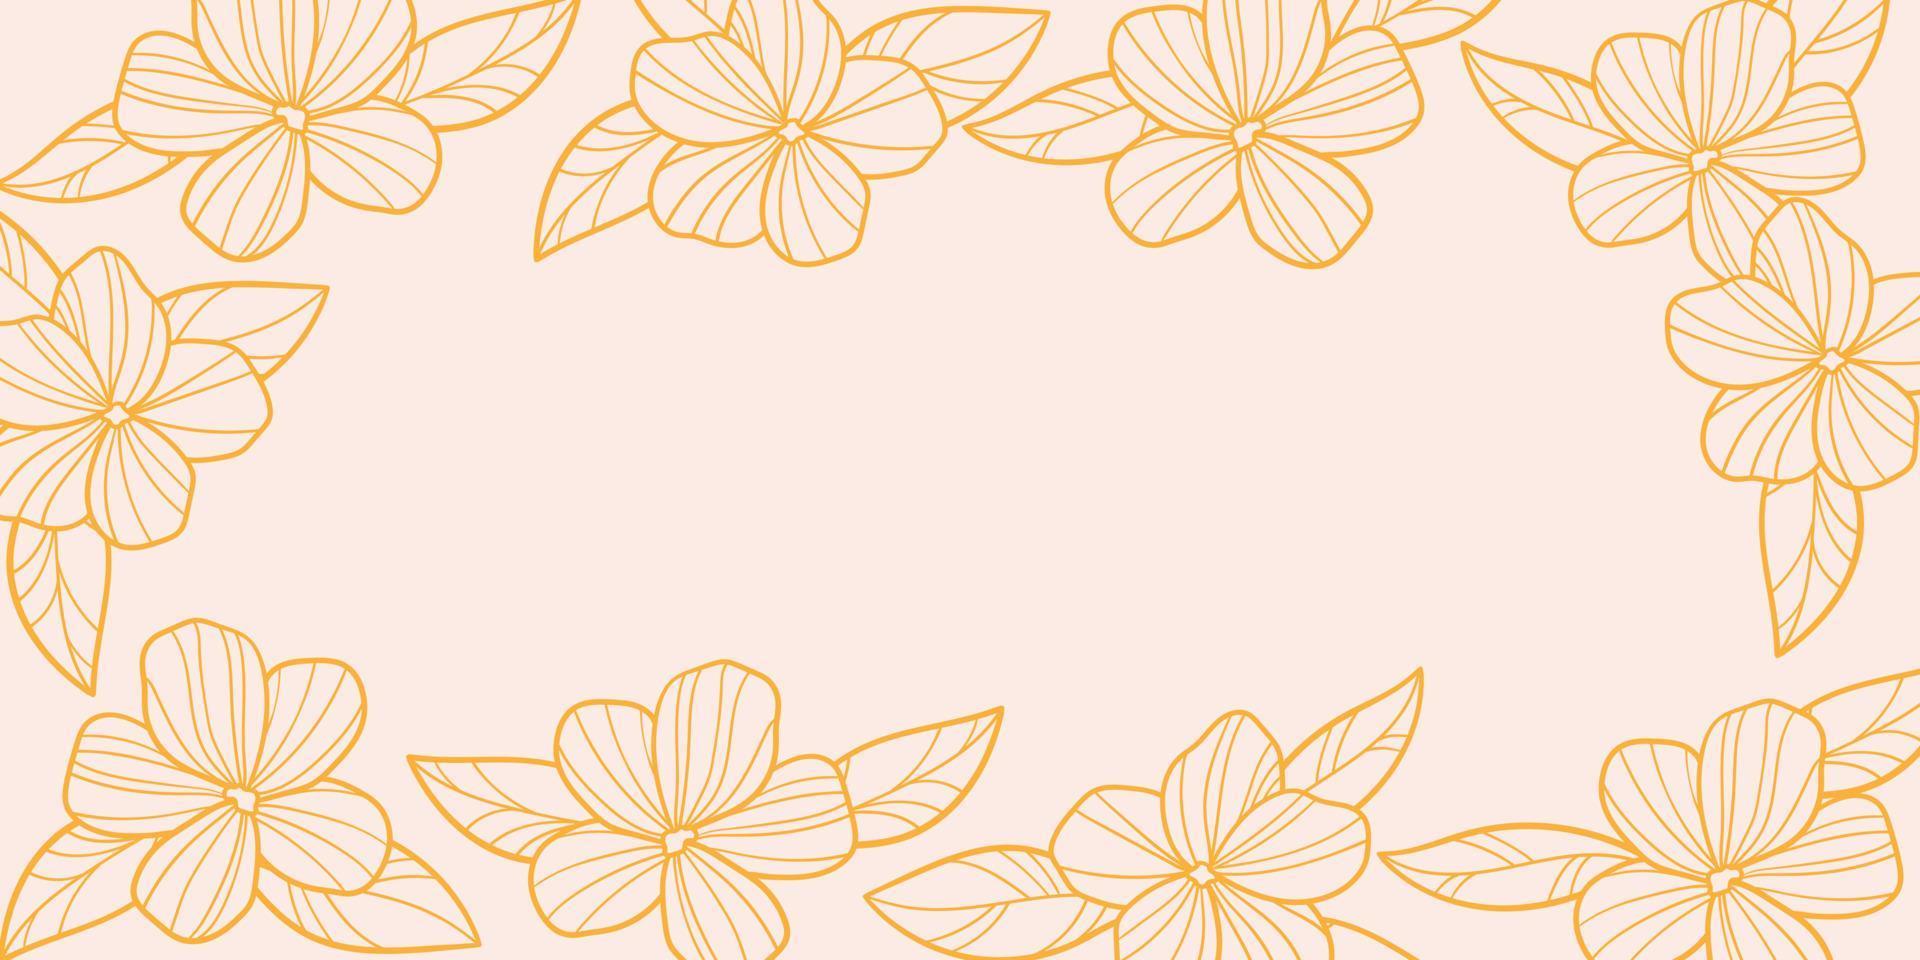 Floral boarder, vector frame with flowers